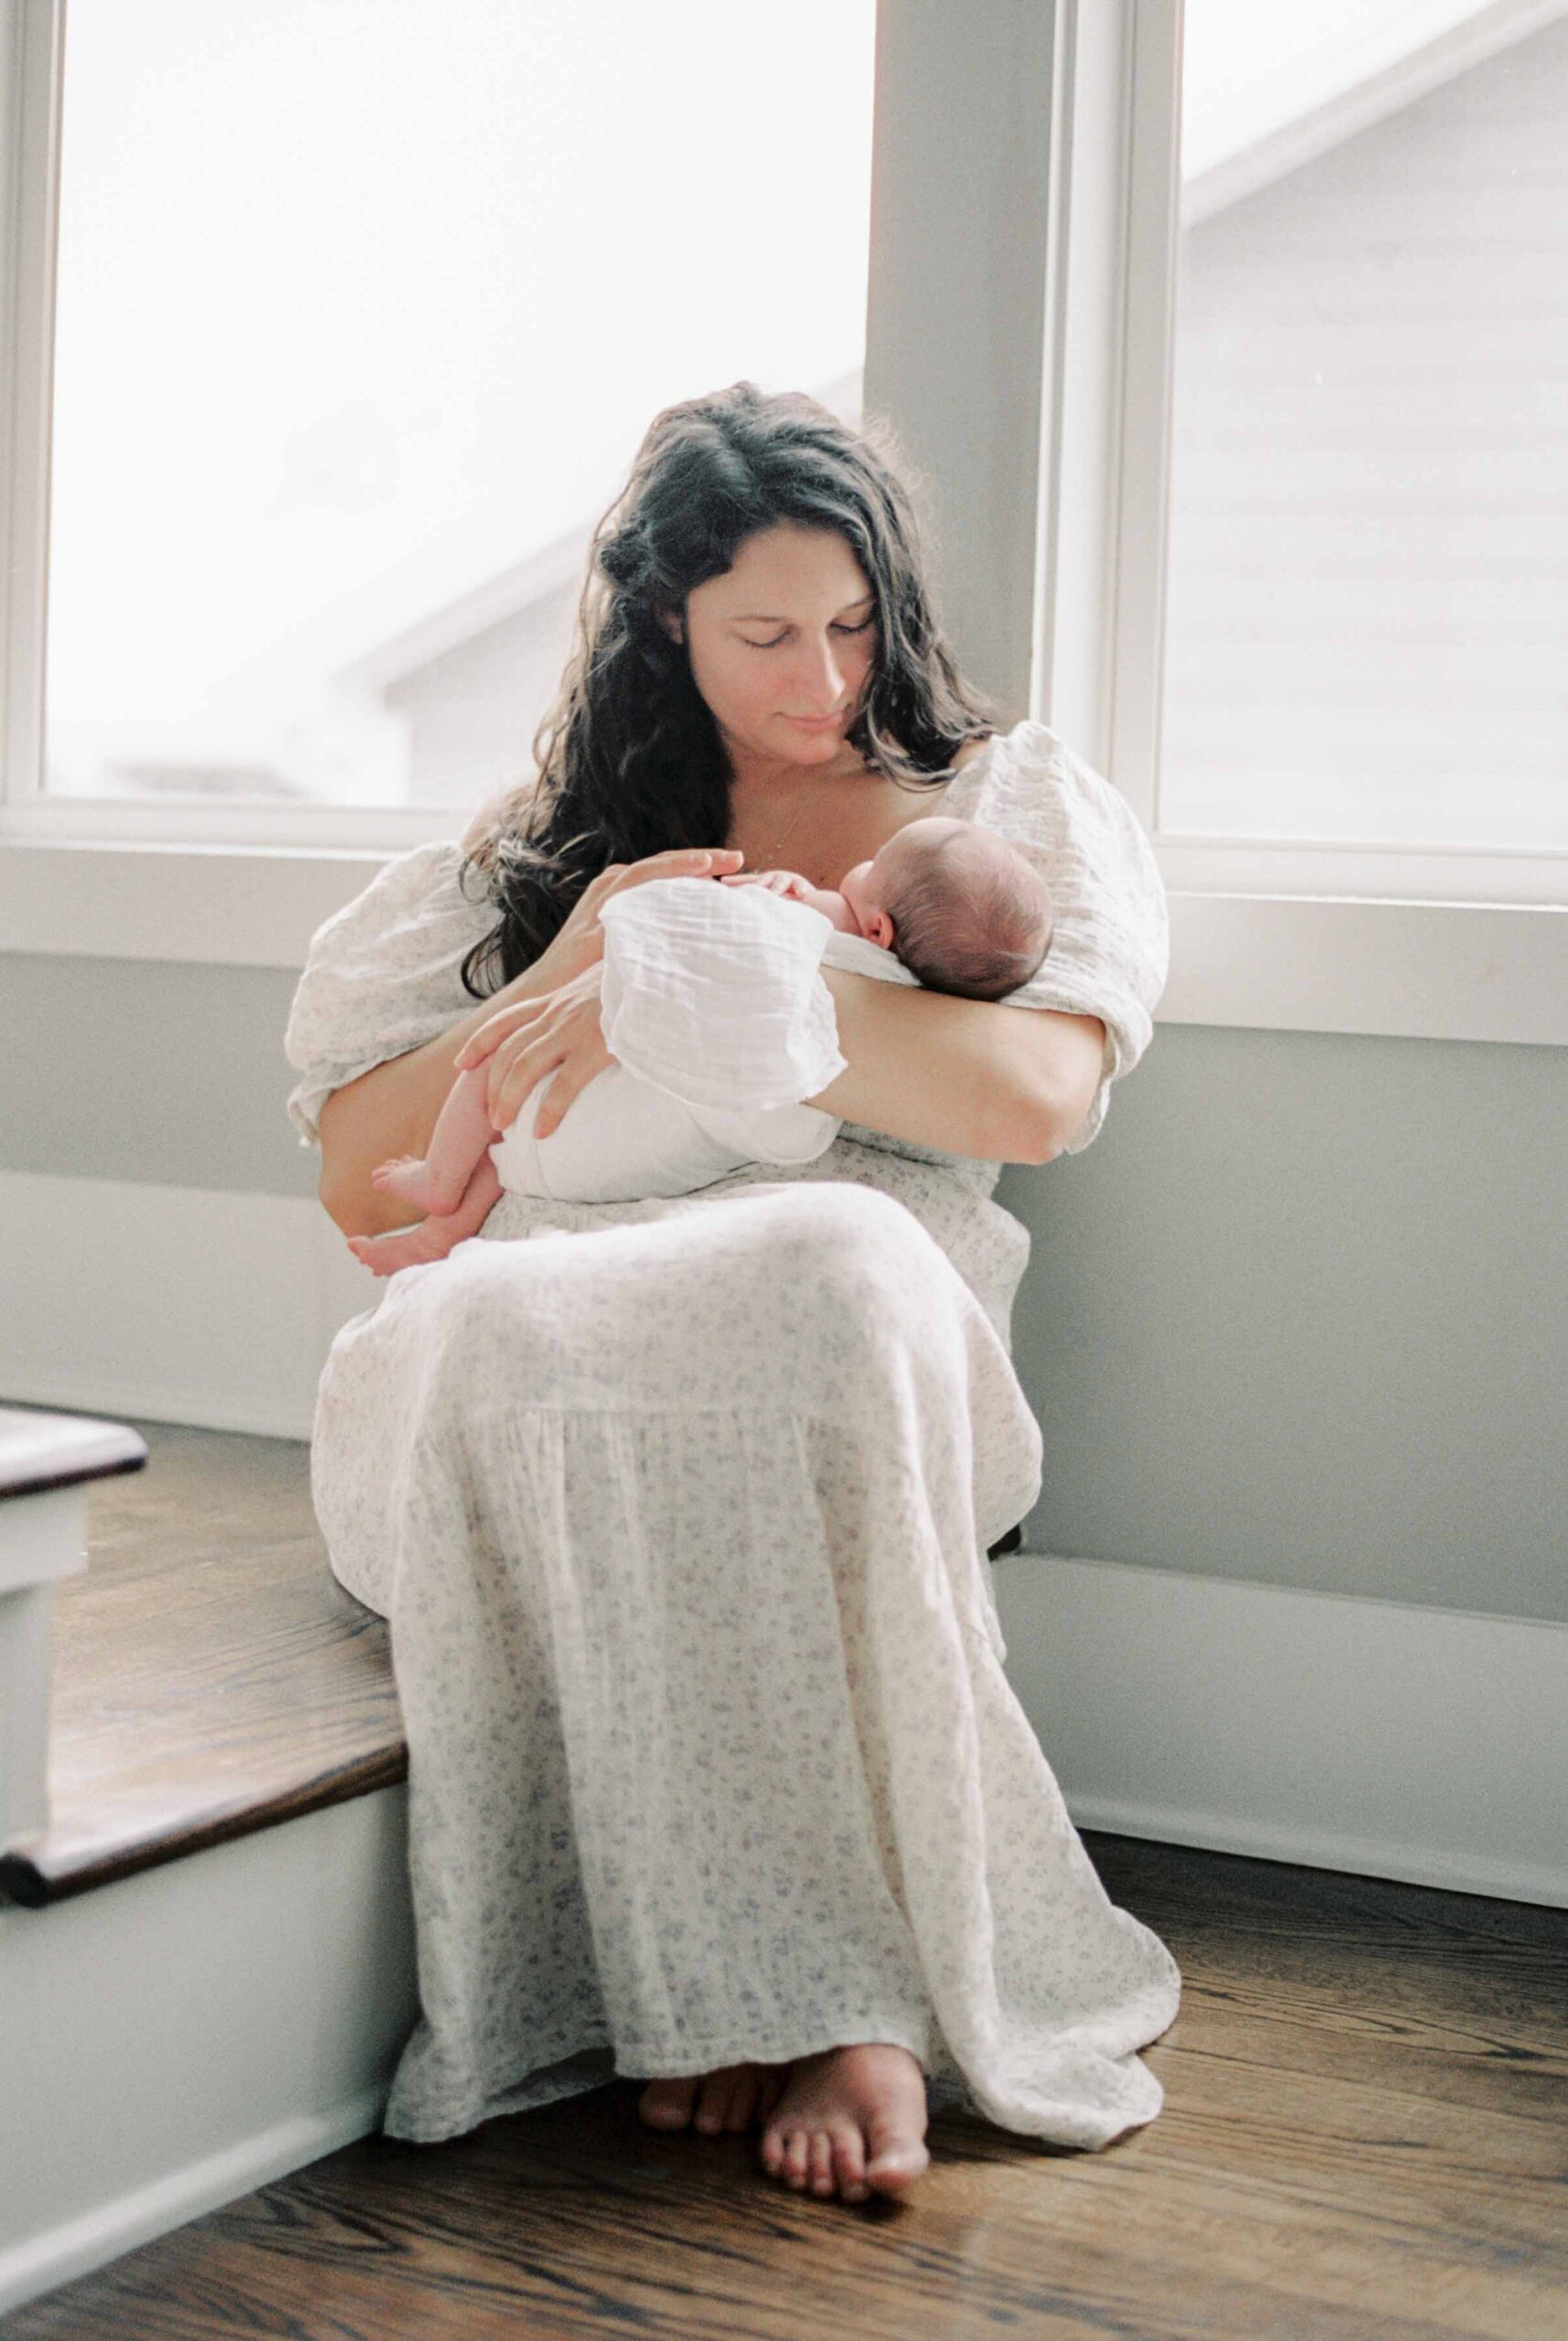 A mother cradles her baby sitting in front of a window